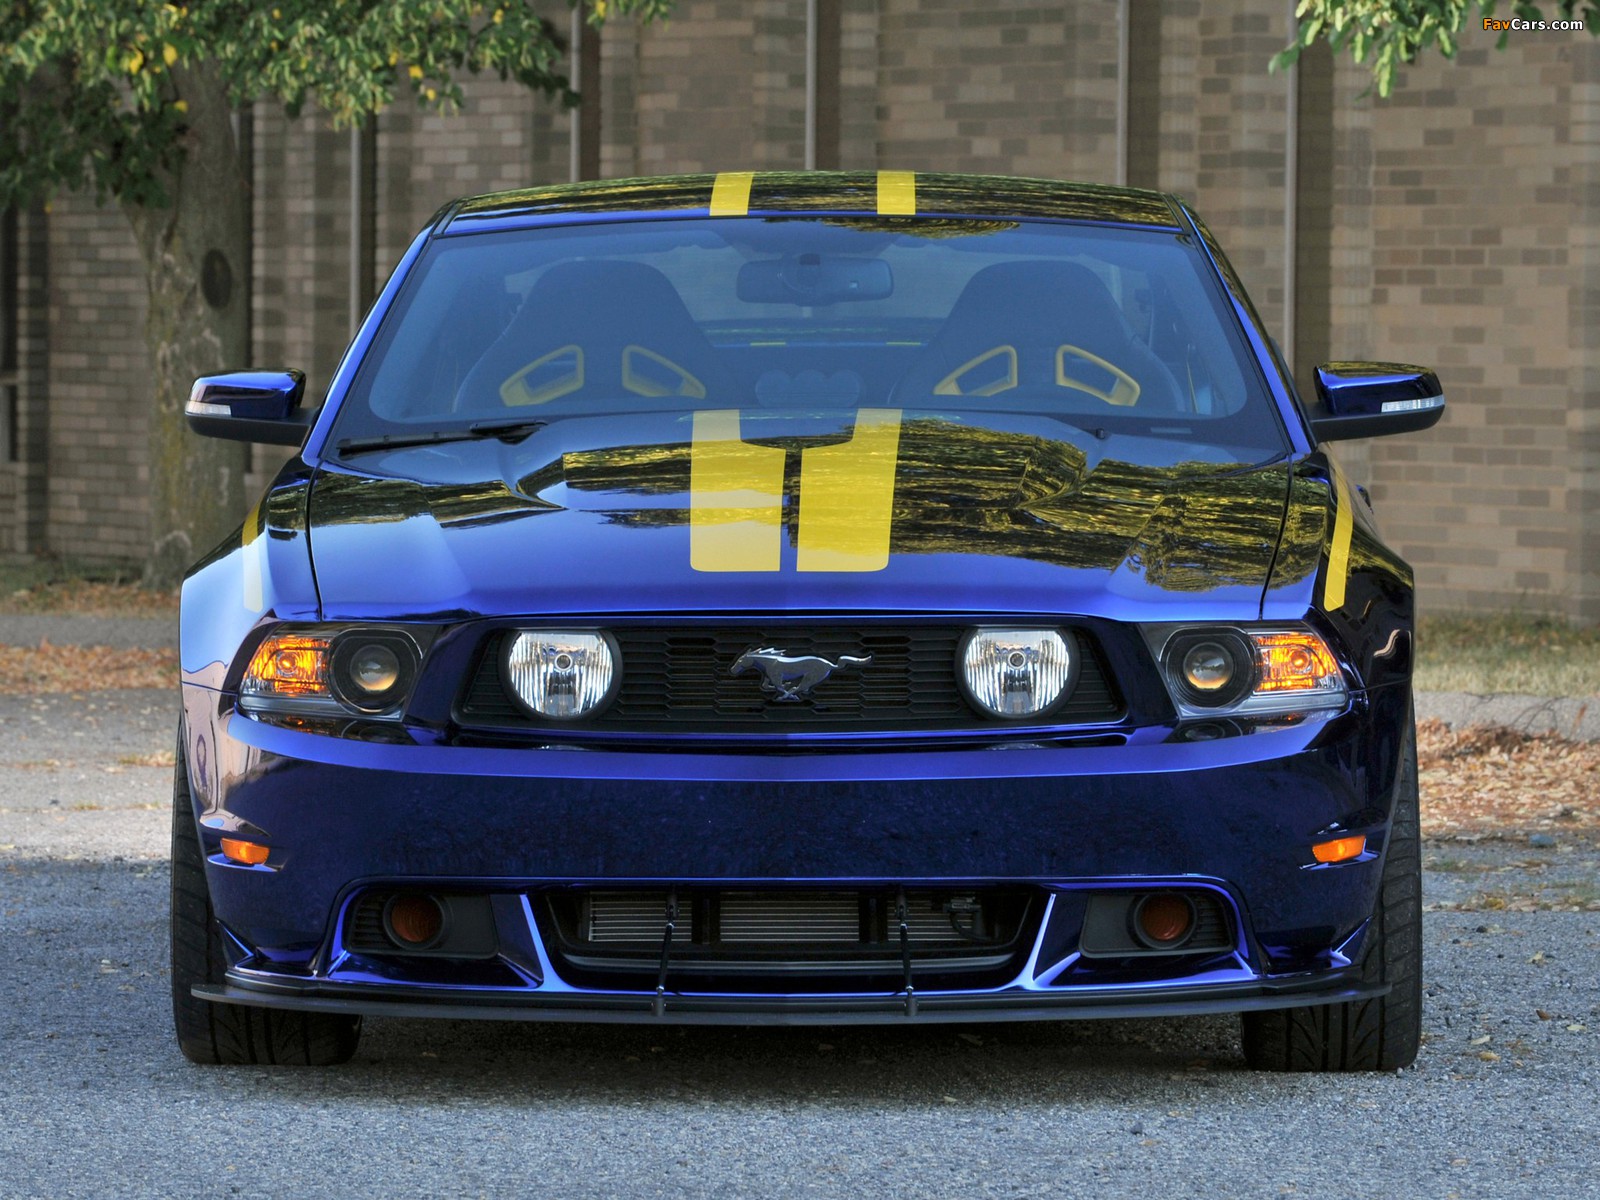 Mustang GT Blue Angels 2011 images (1600 x 1200)